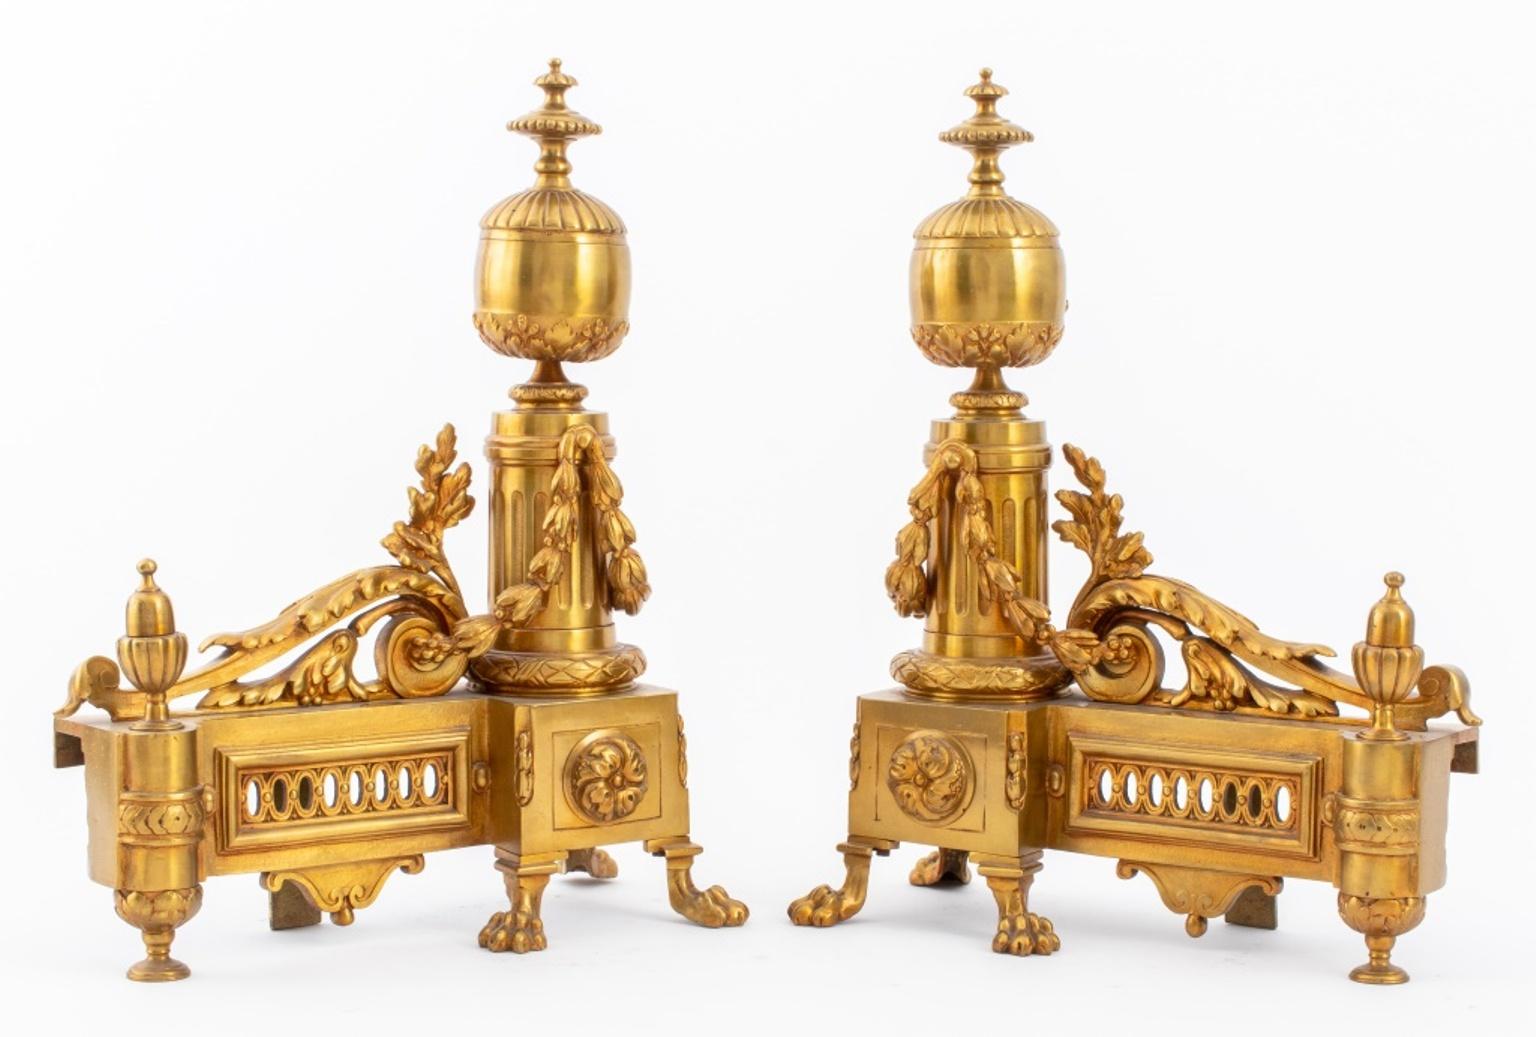 Pair of Louis XVI gilt bronze andirons cast with scrolling foliate design and florettes, each upon four paw feet.

Dimensions: Each: 14.25